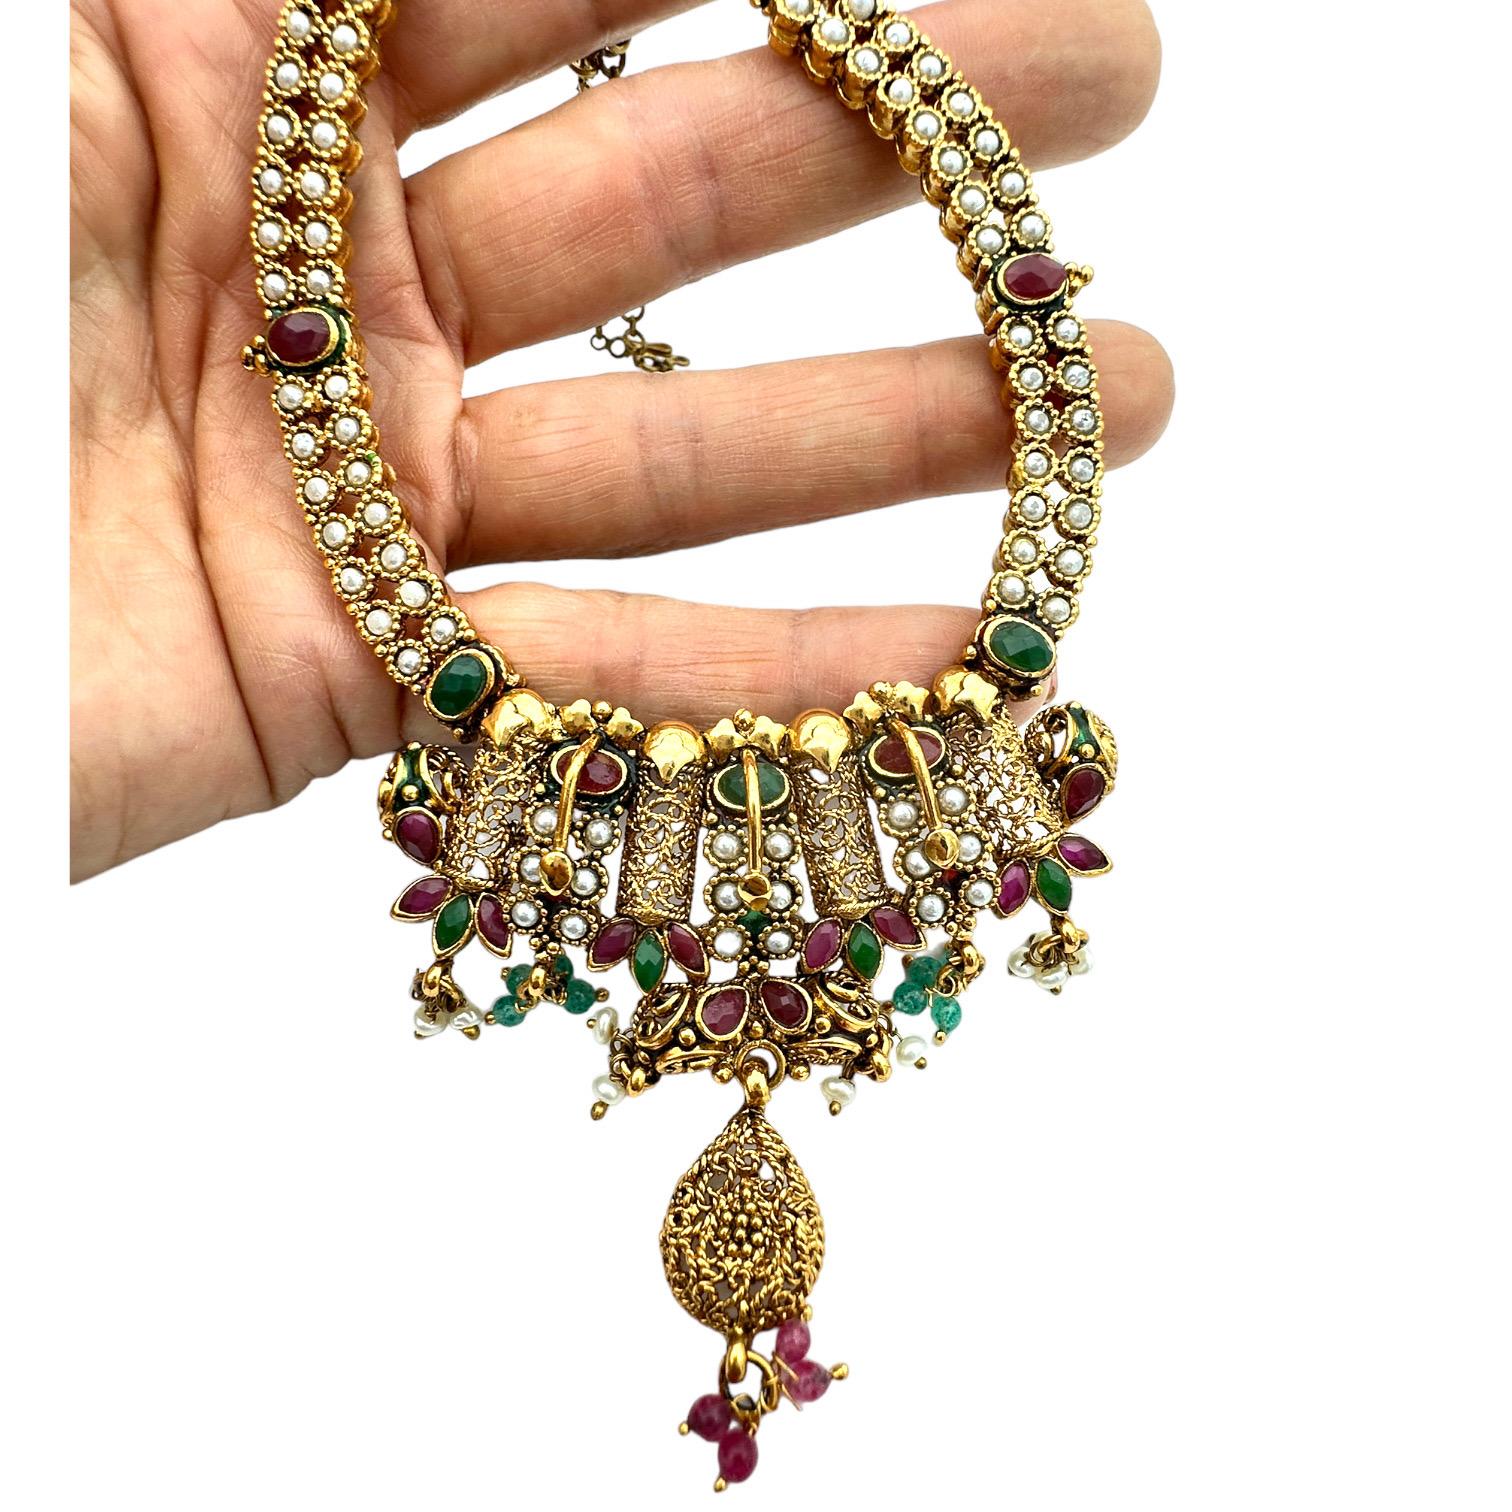  Add a touch of luxuriousness to your look with the Cleopatra necklace. This ornate choker features an exquisite handmade design, delicately crafted using color to create a truly unique piece. Wear it day or night for a glamorous finish every